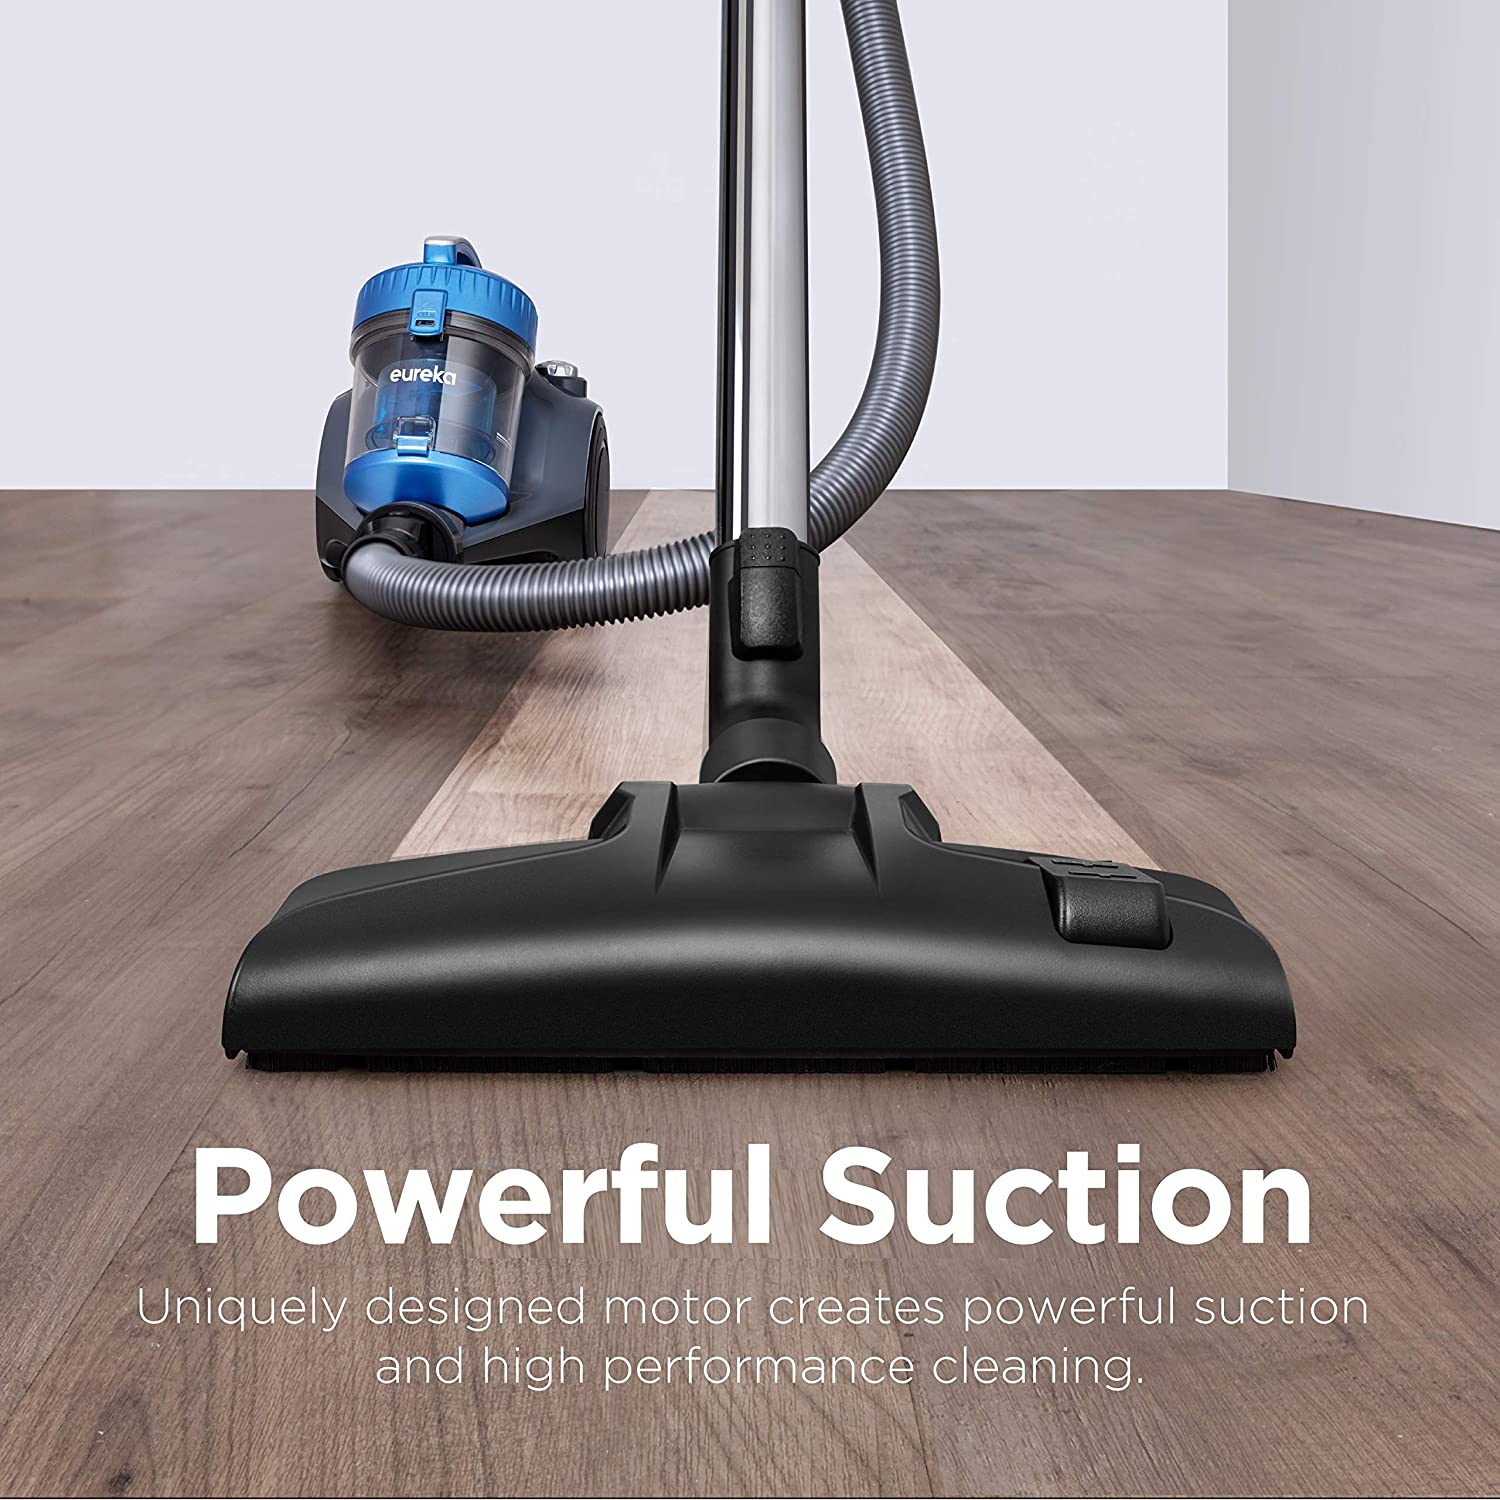 Eureka NEN110A Bagless Canister Vacuum Cleaner, Lightweight Corded Vacuum for Carpets and Hard Floors, Blue - image 2 of 5